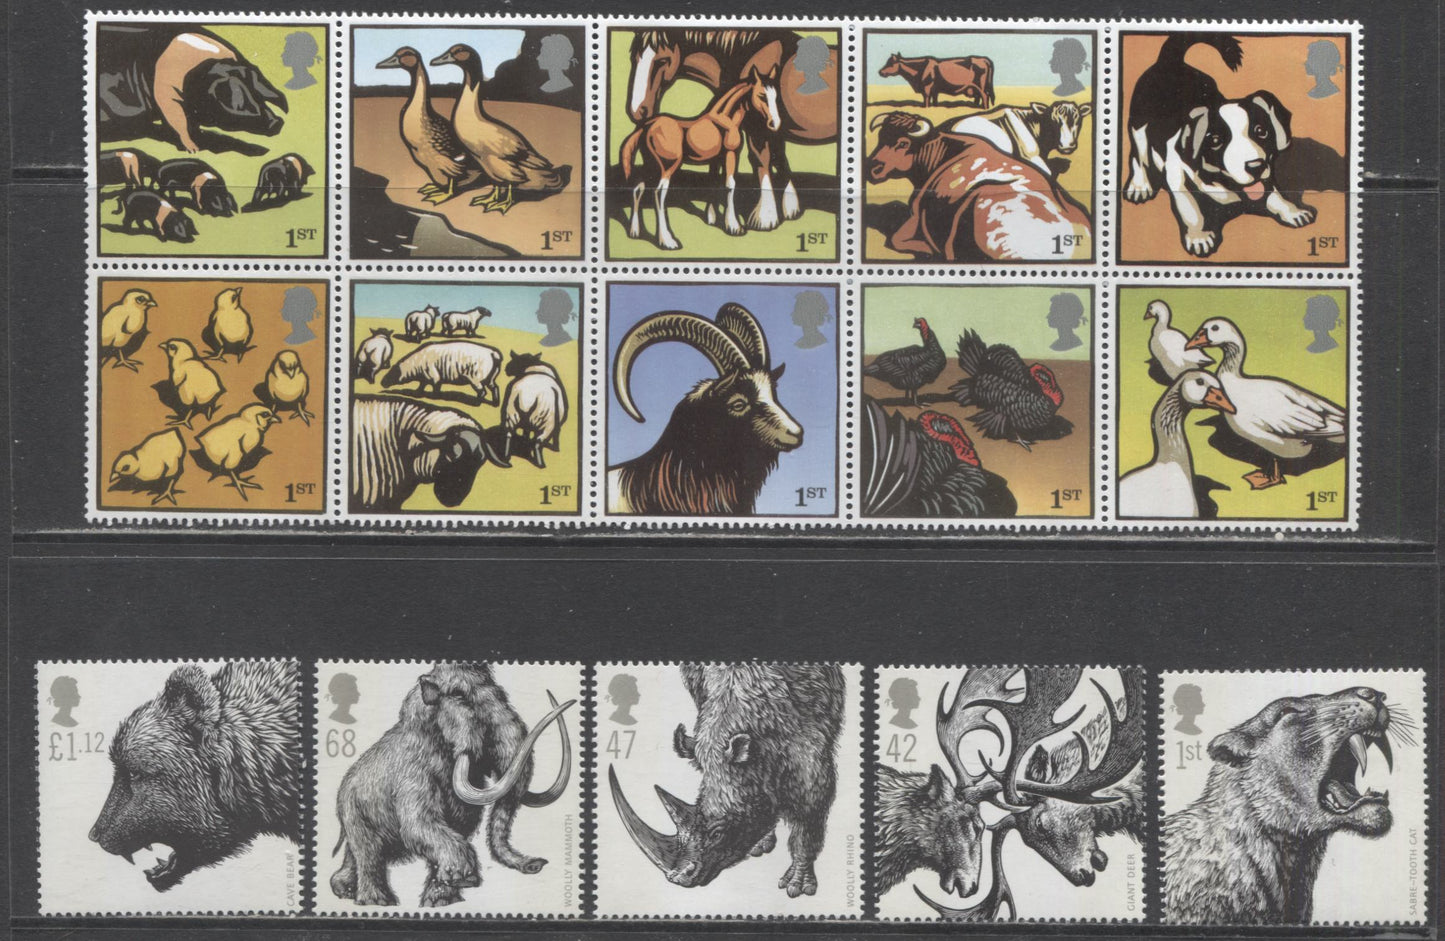 Lot 20 Great Britain SC#2260a/2363 2005-2006 Farm Animals - Ice Age Animals Issues, 6 VFNH Singles & Block Of 10, Click on Listing to See ALL Pictures, 2017 Scott Cat. $23.1